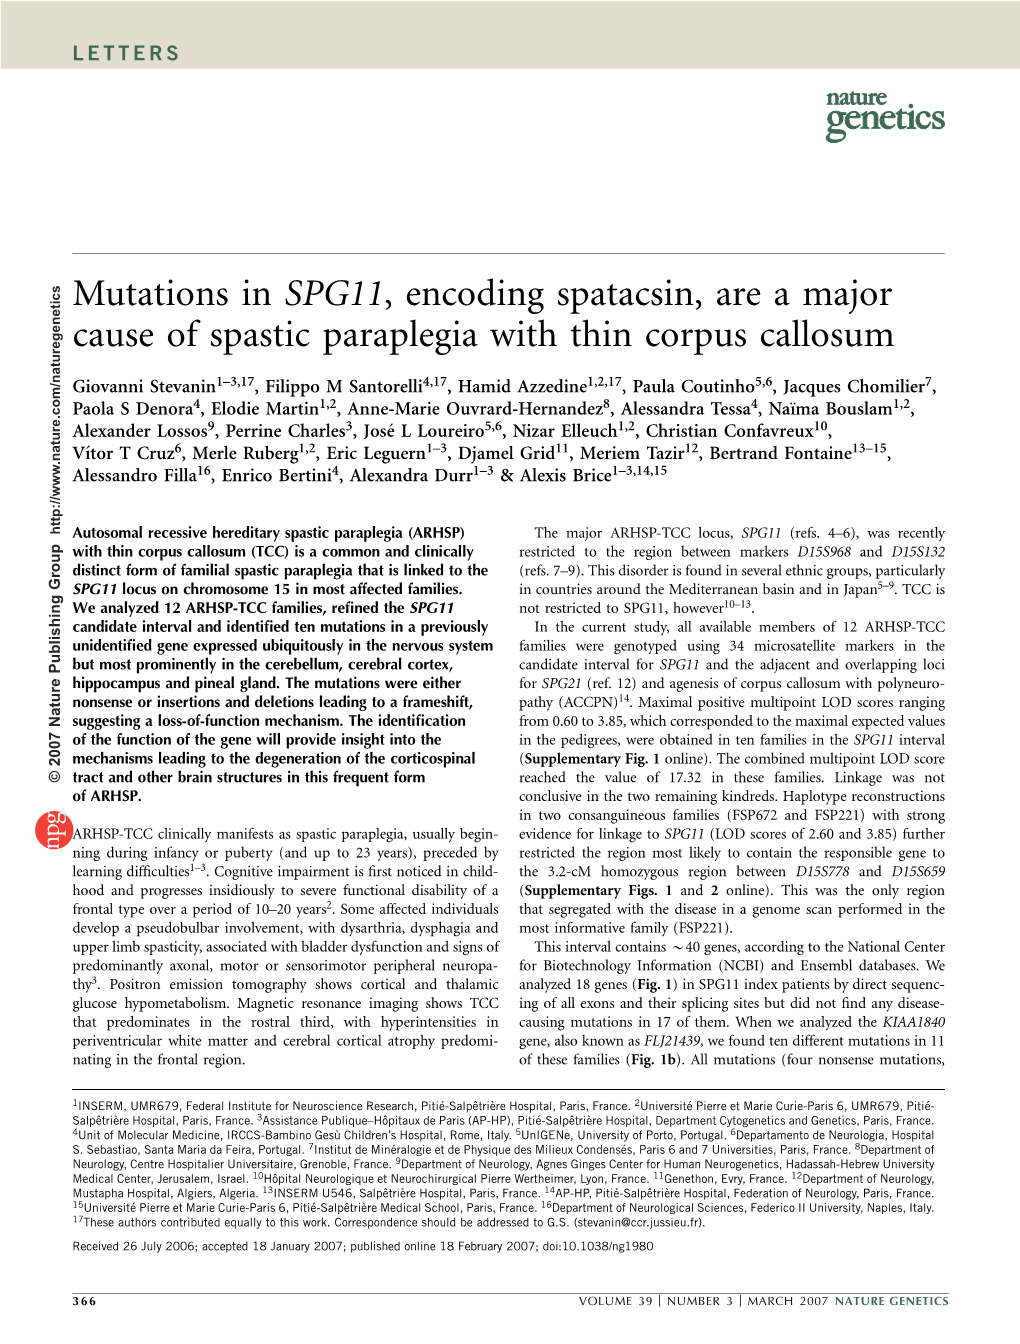 Mutations in SPG11, Encoding Spatacsin, Are a Major Cause of Spastic Paraplegia with Thin Corpus Callosum